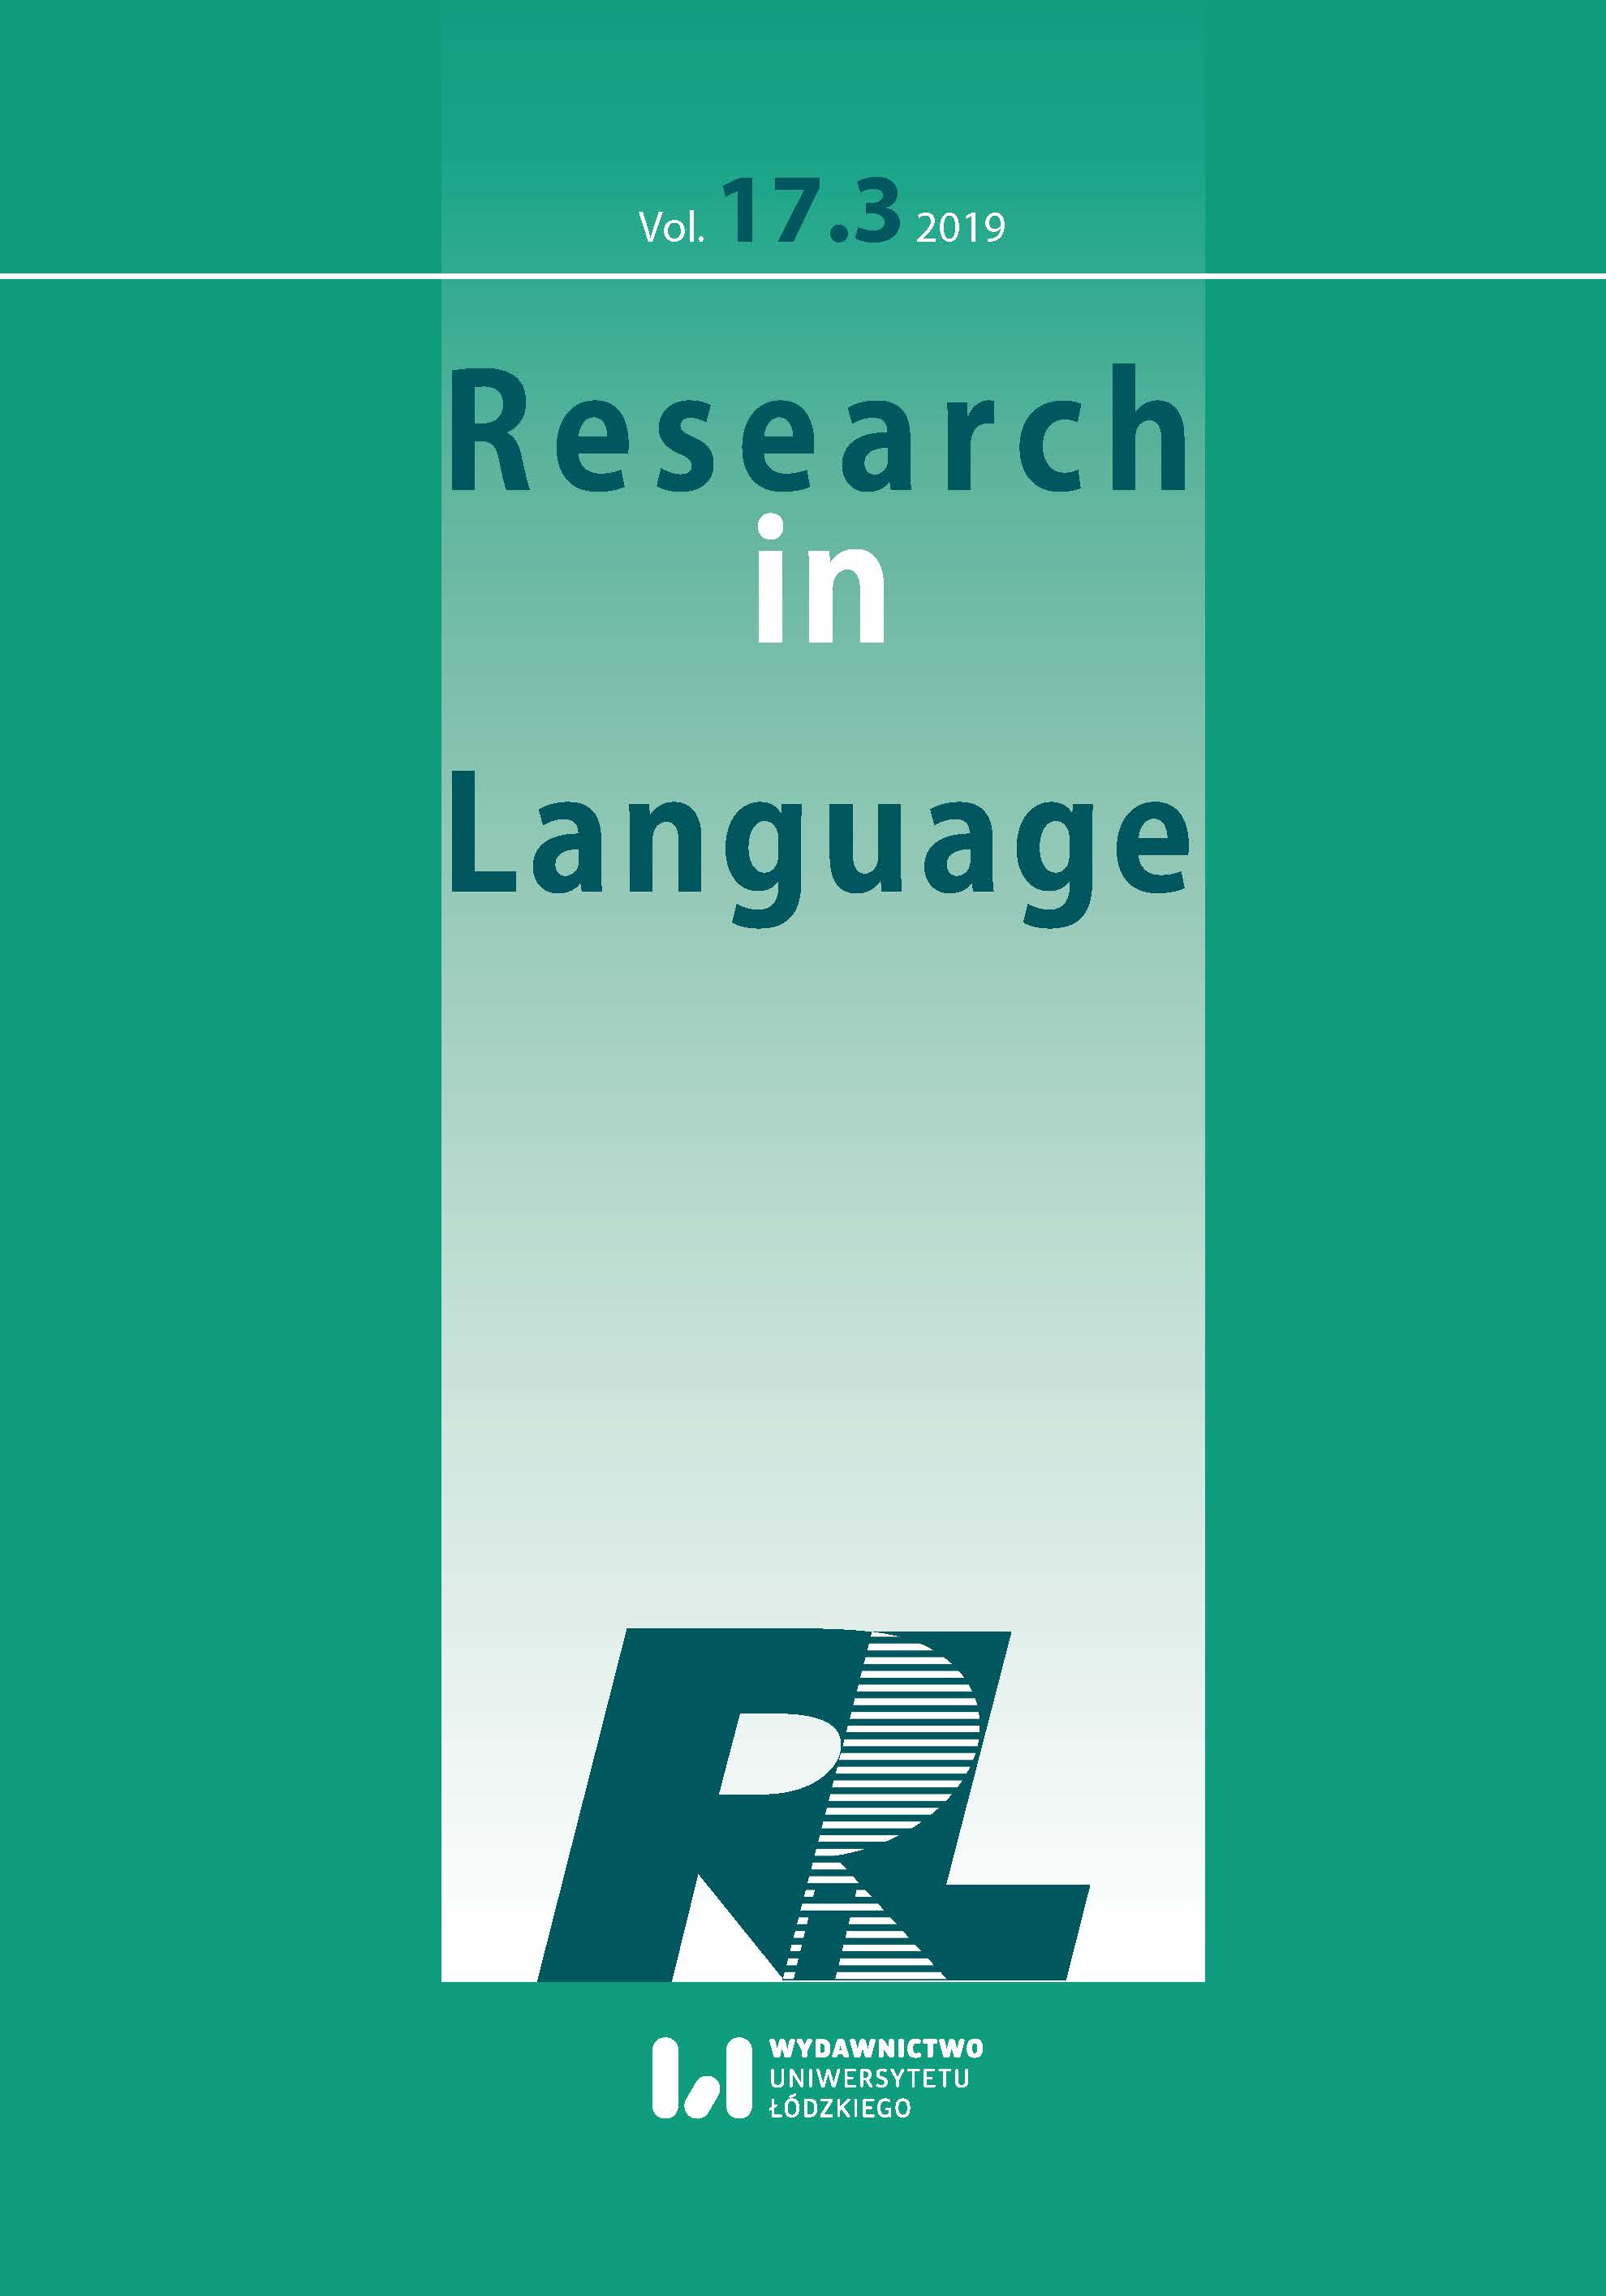 Vowel Perception and Transcription Trainer for Learners of English as a Foreign Language Cover Image